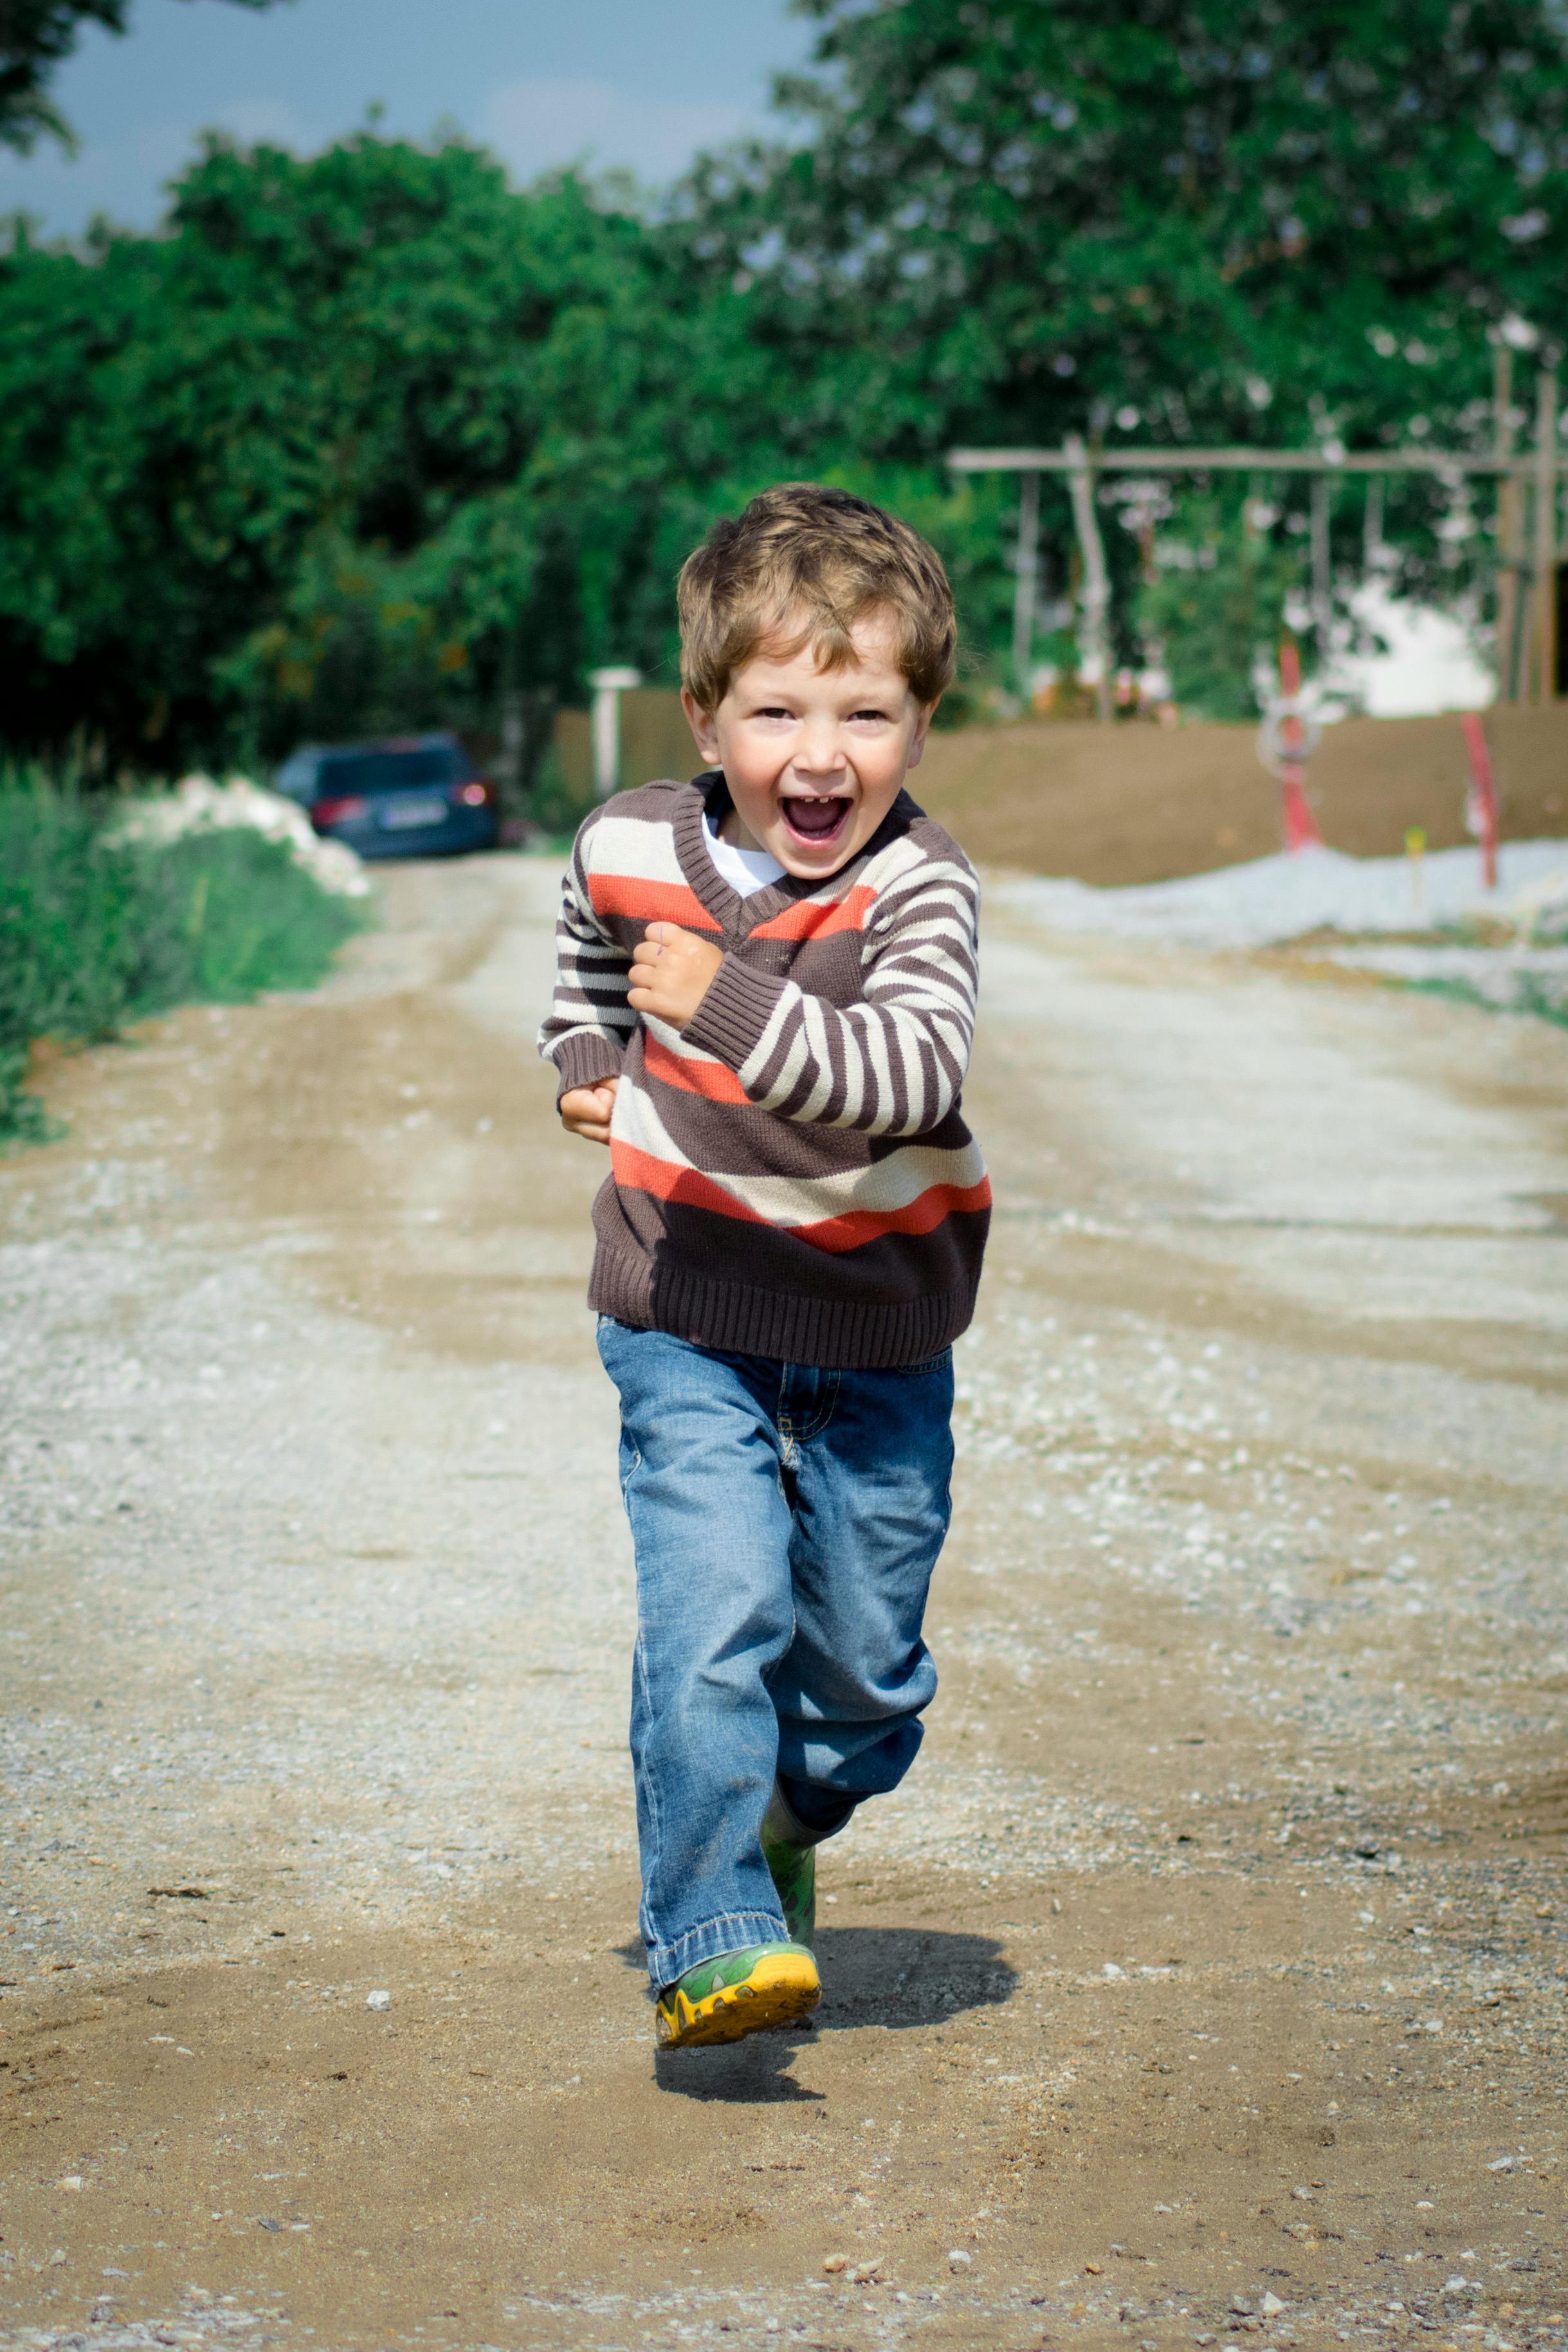 Happy little boy running outdoors in the park. | Photo: Pexels